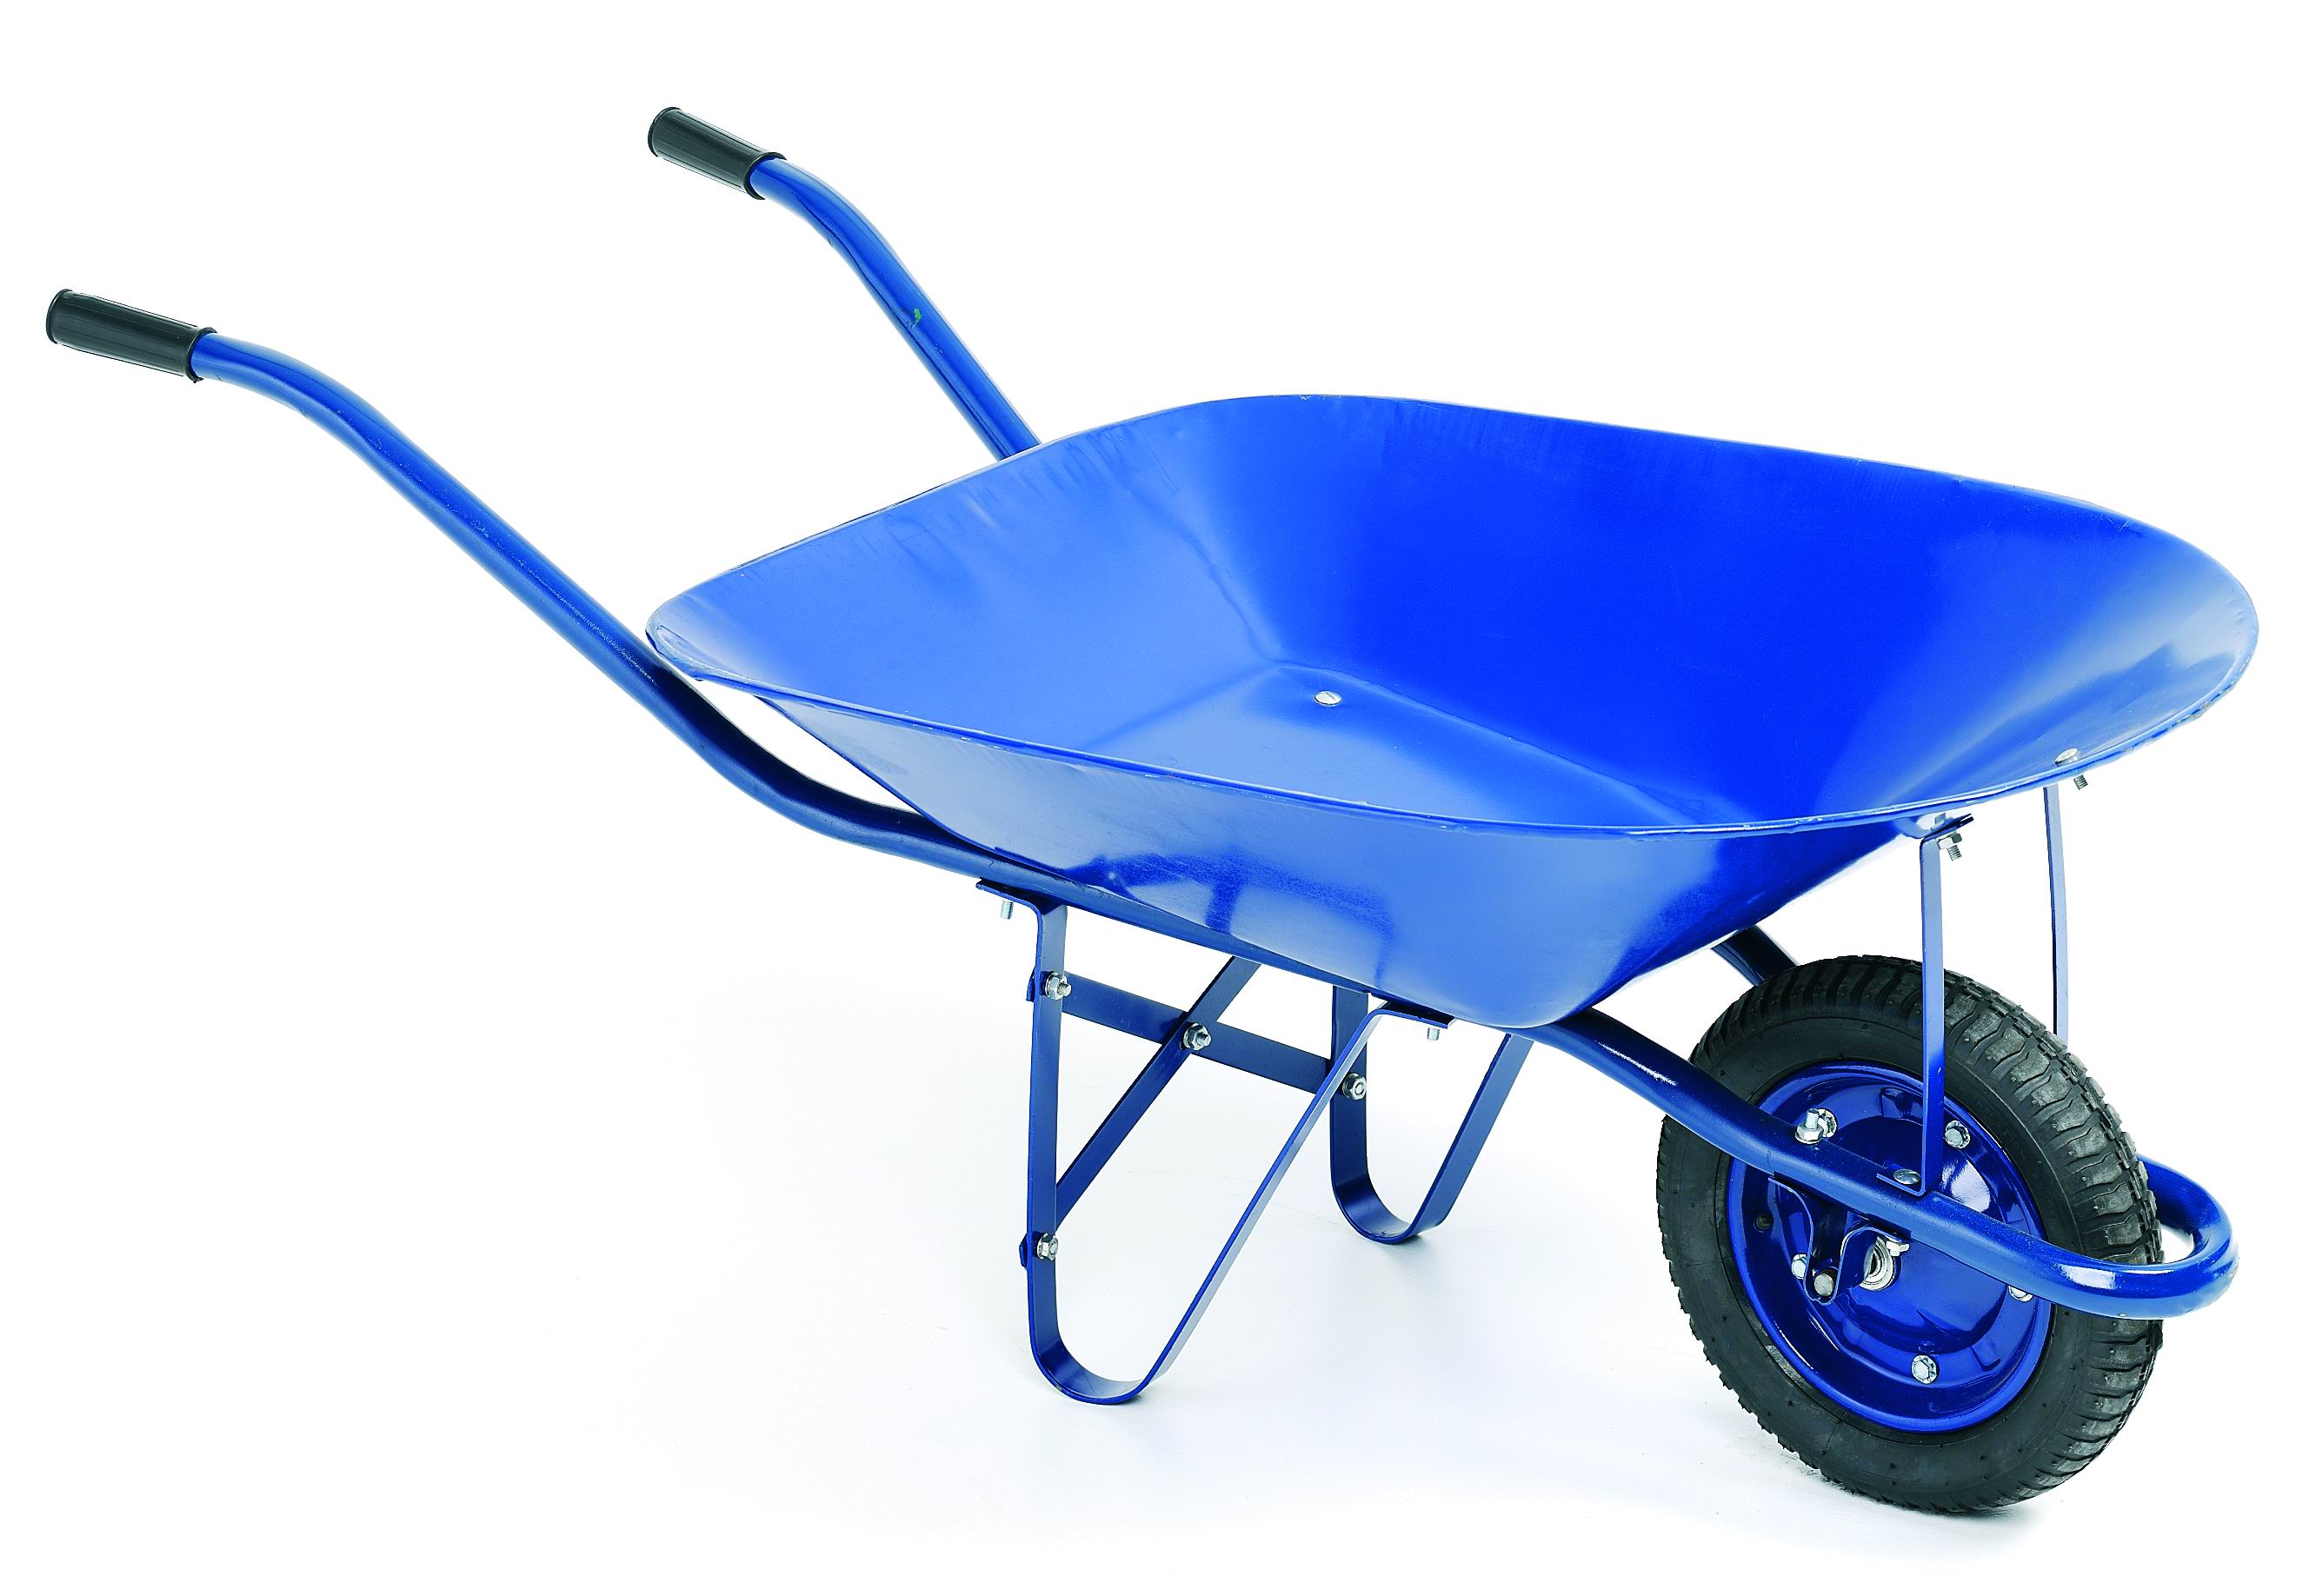 34 Wheelbarrow Pictures Free Cliparts That You Can Download To You